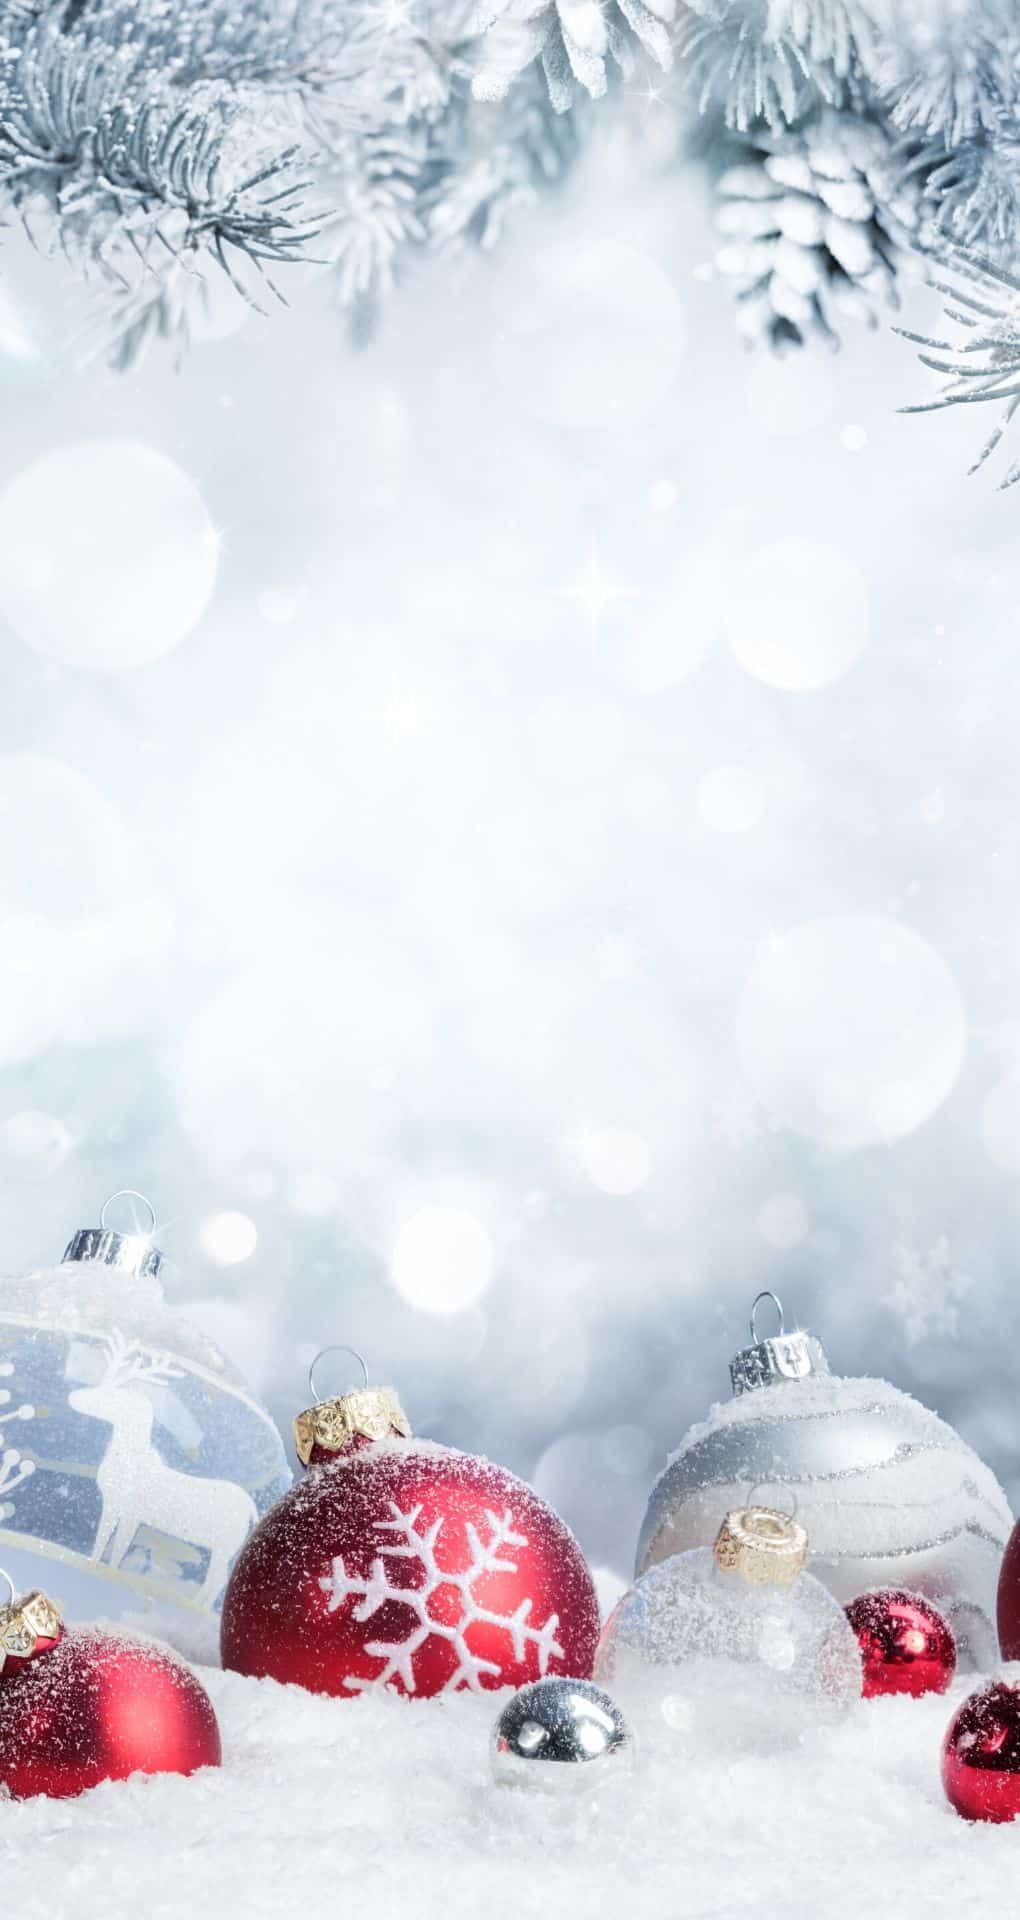 FREE WALLPAPER FOR IPHONE. THE CHRISTMAS COLLECTION 2021